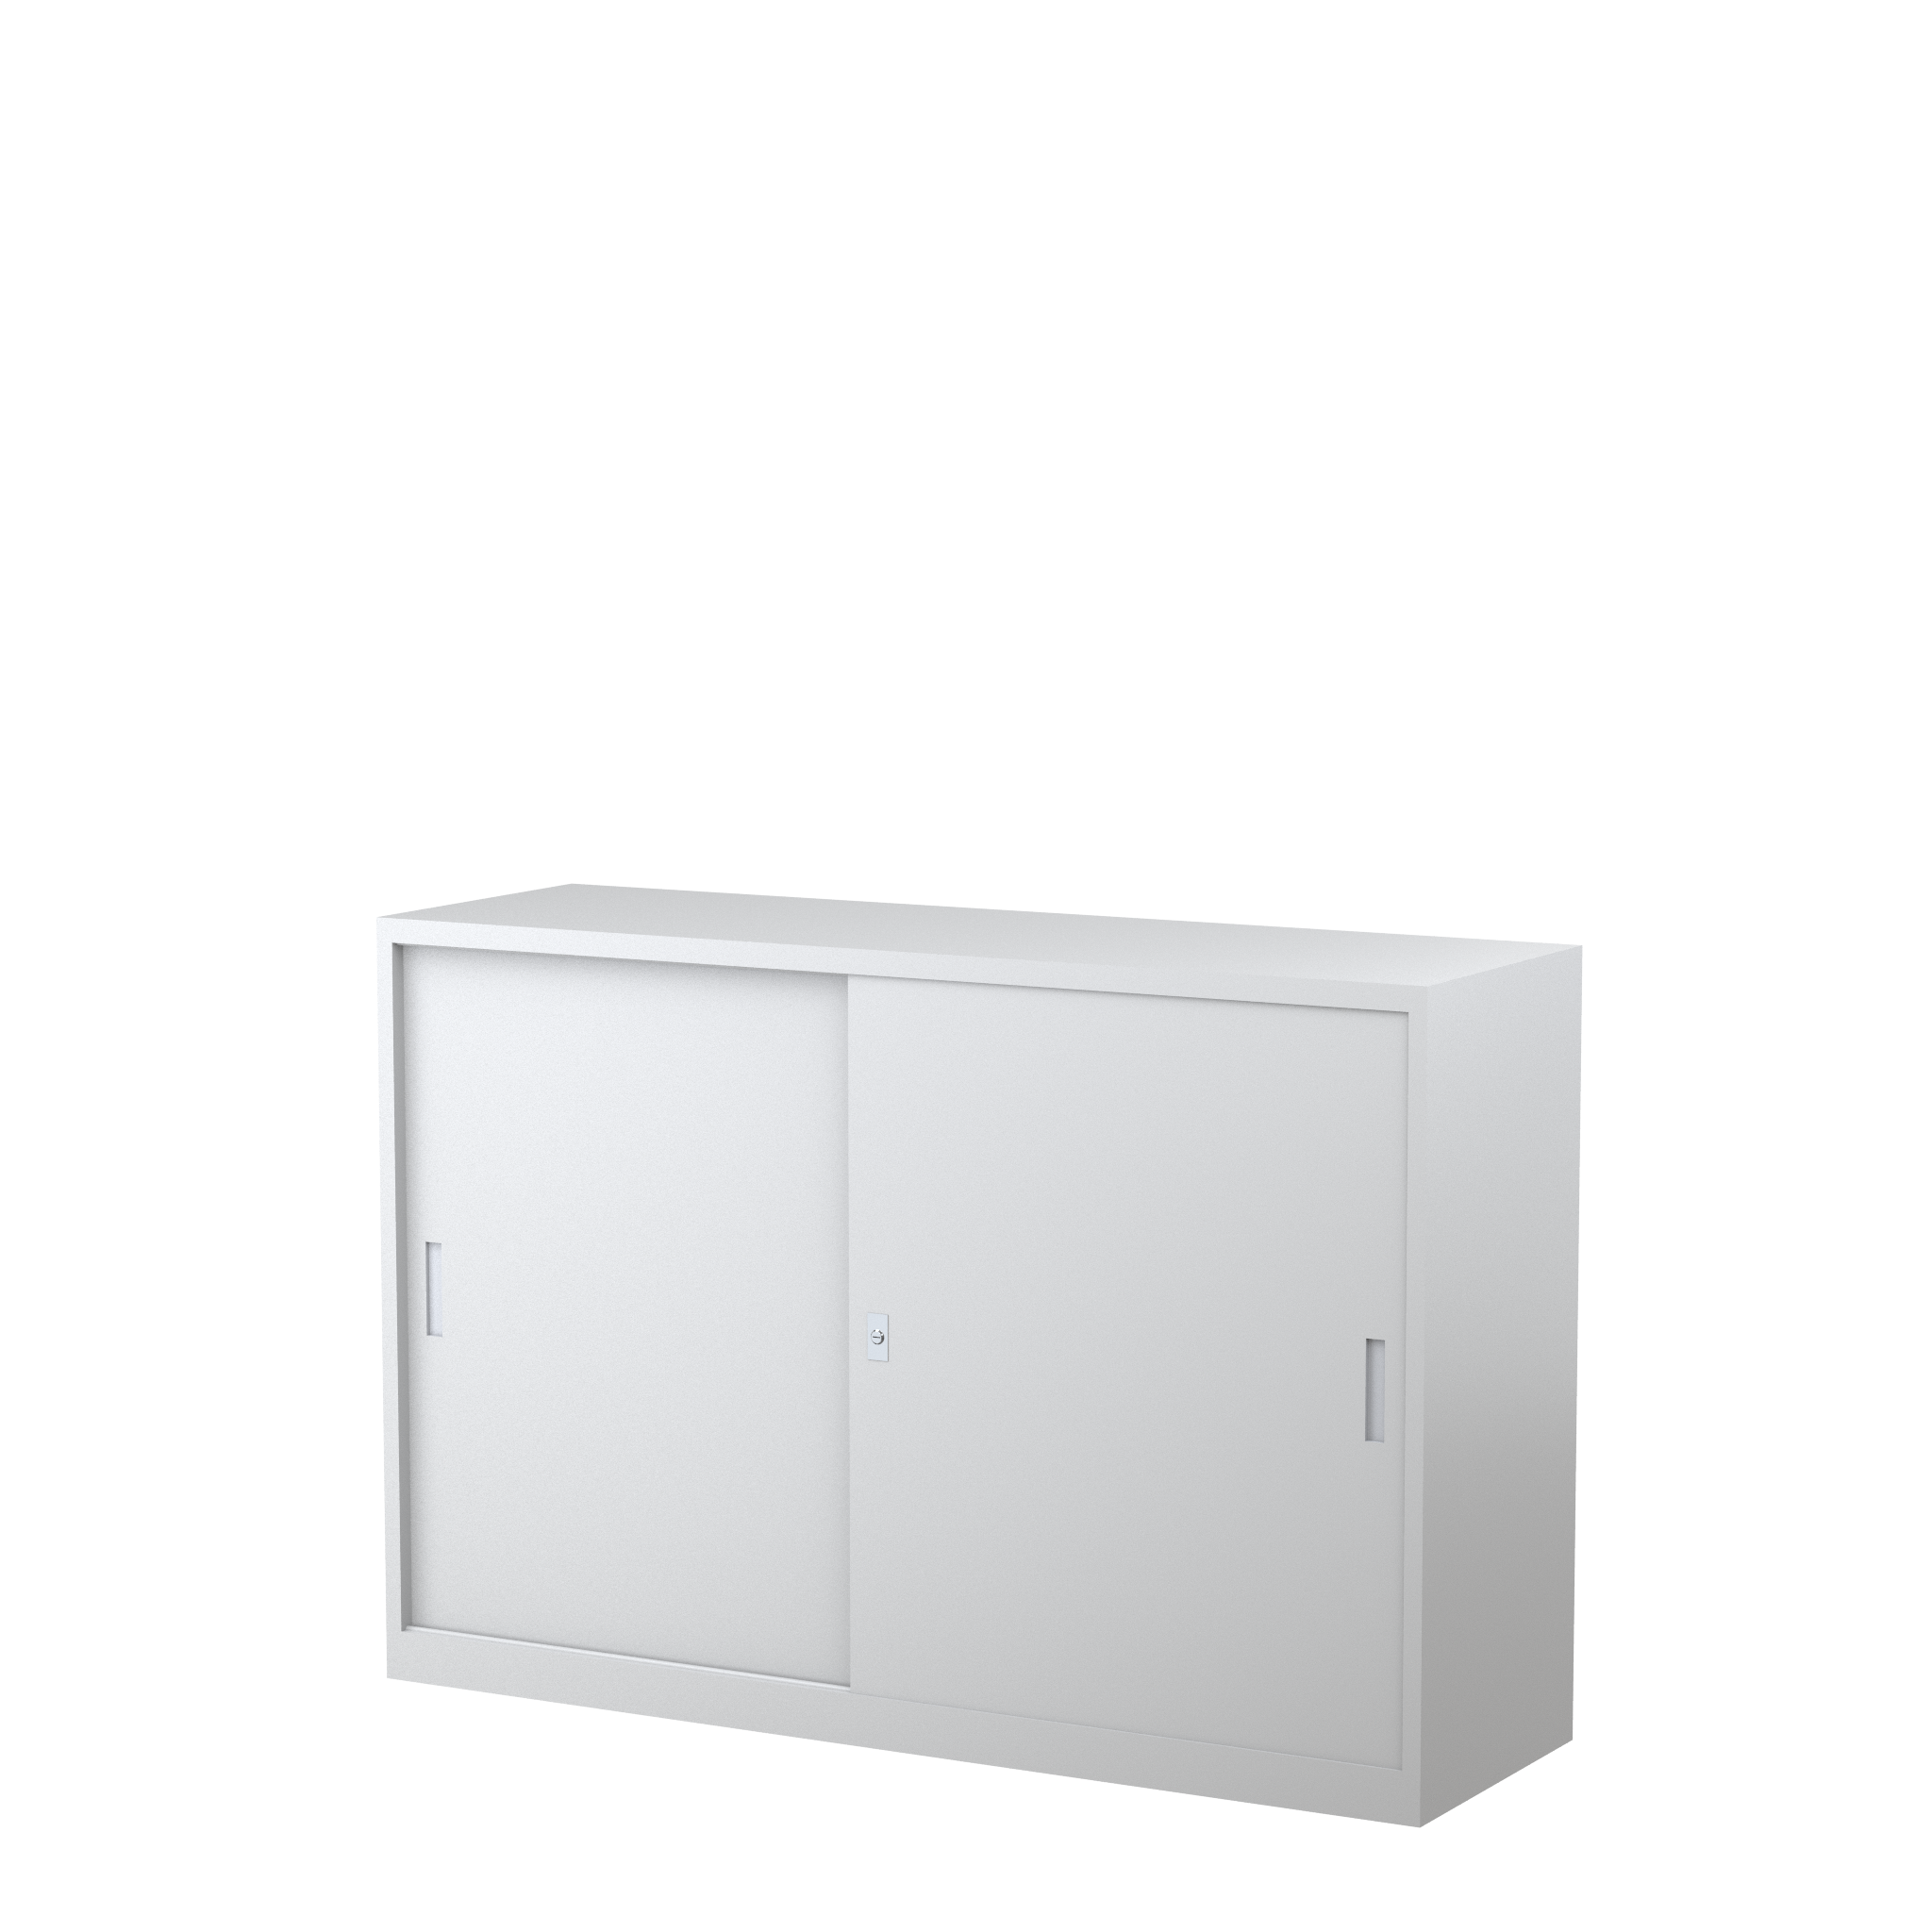 SD1015_1500 - STEELCO SS Cabient 1015H x 1500W x 465D - 2 Shelves-WS.png